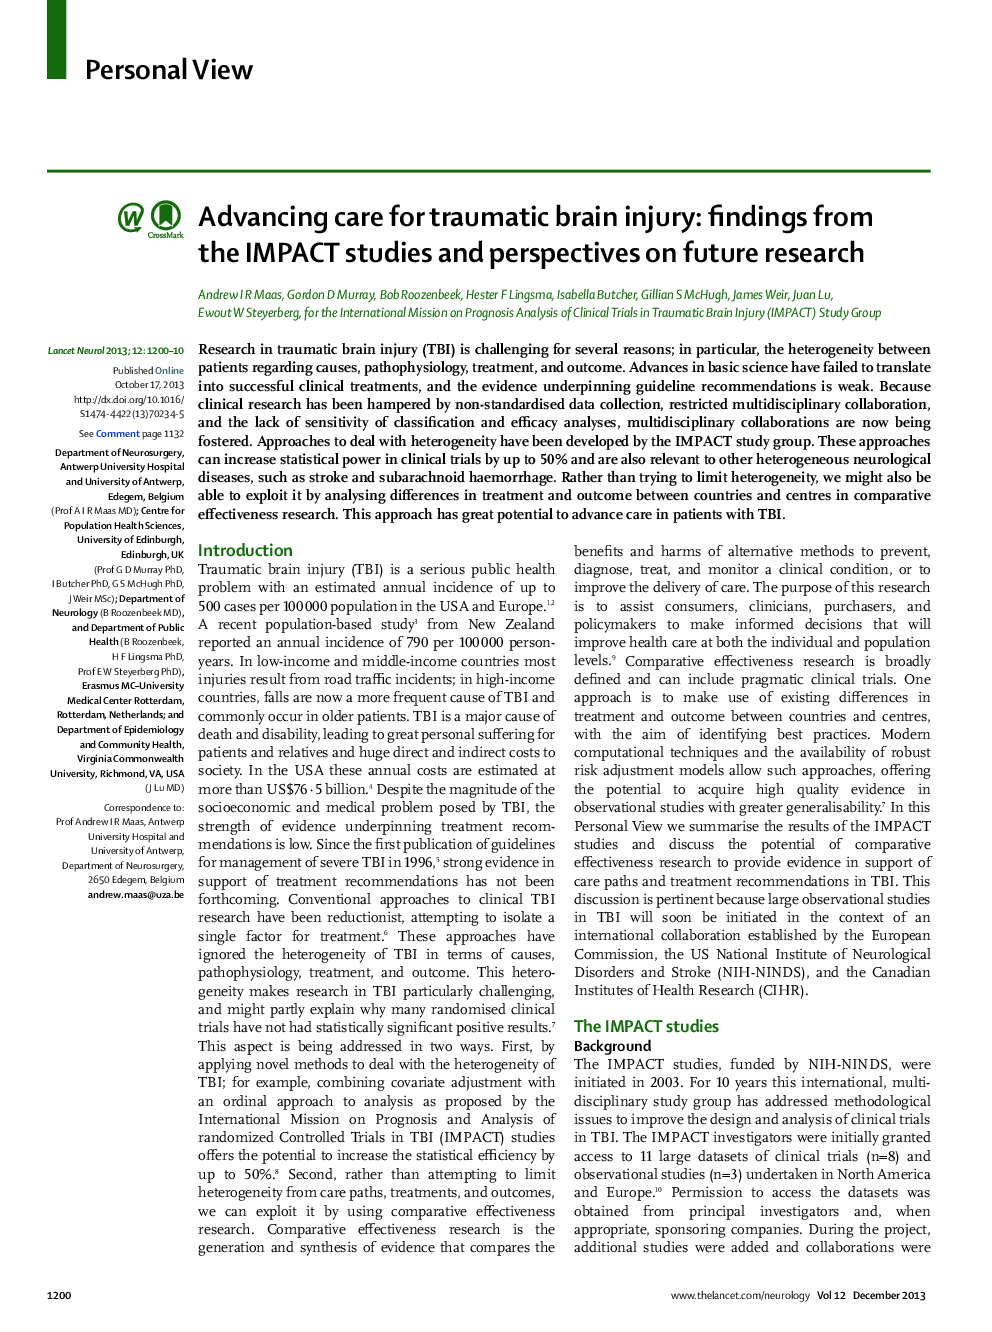 Advancing care for traumatic brain injury: findings from the IMPACT studies and perspectives on future research